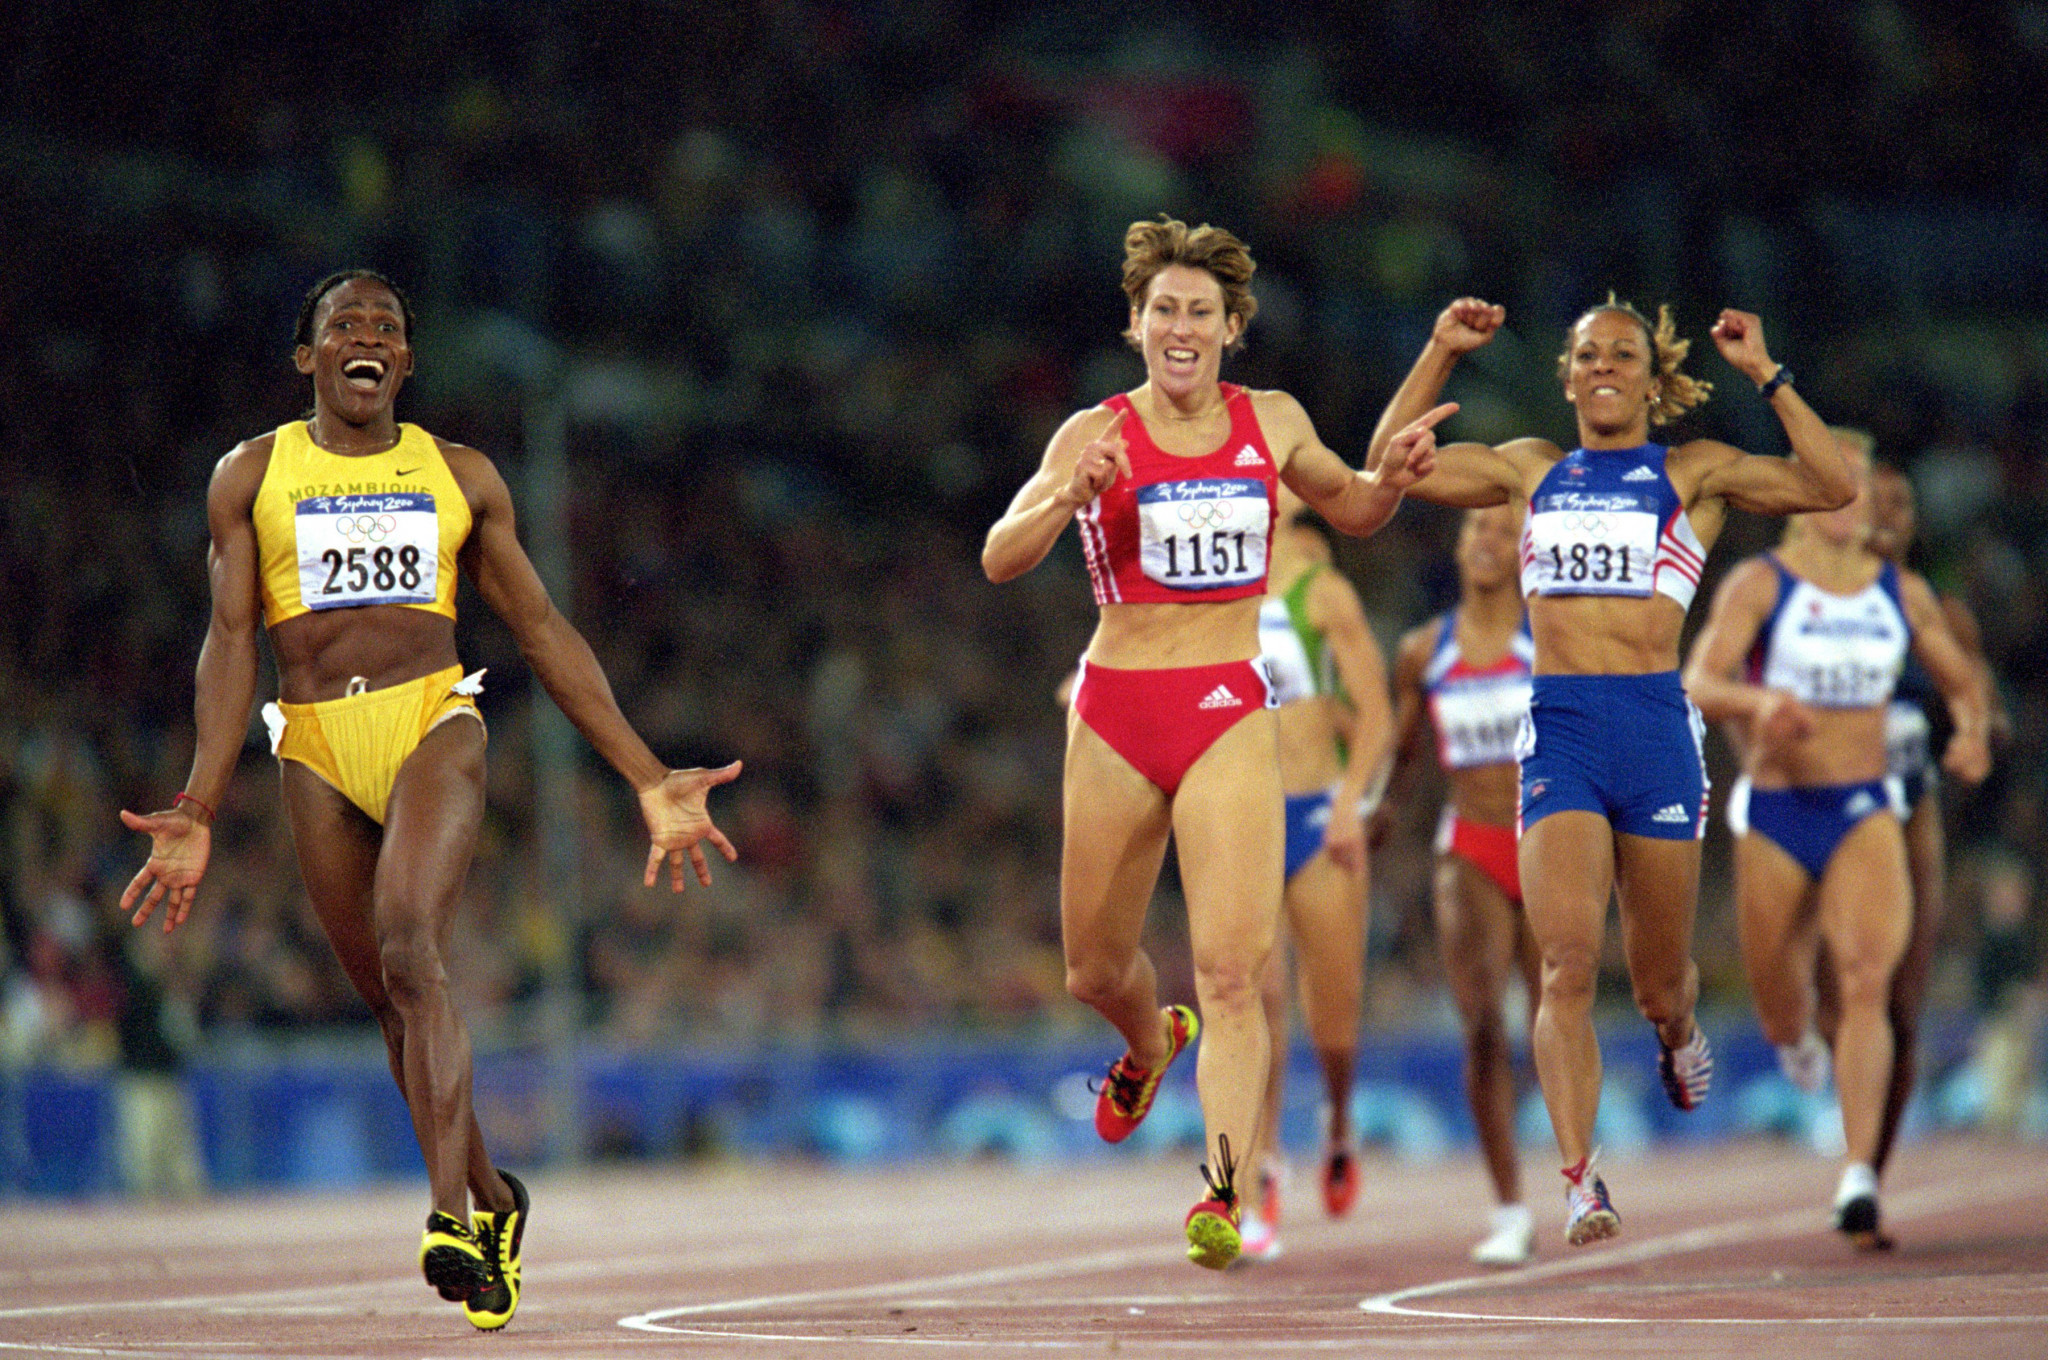 Mozambique's Maria Mutola shows her delight at winning the 800m at Sydney 2000 as the silver and bronze medallists, Austria's Stephanie Graf and Britain's Kelly Holmes, seem just as pleased ©Getty Images